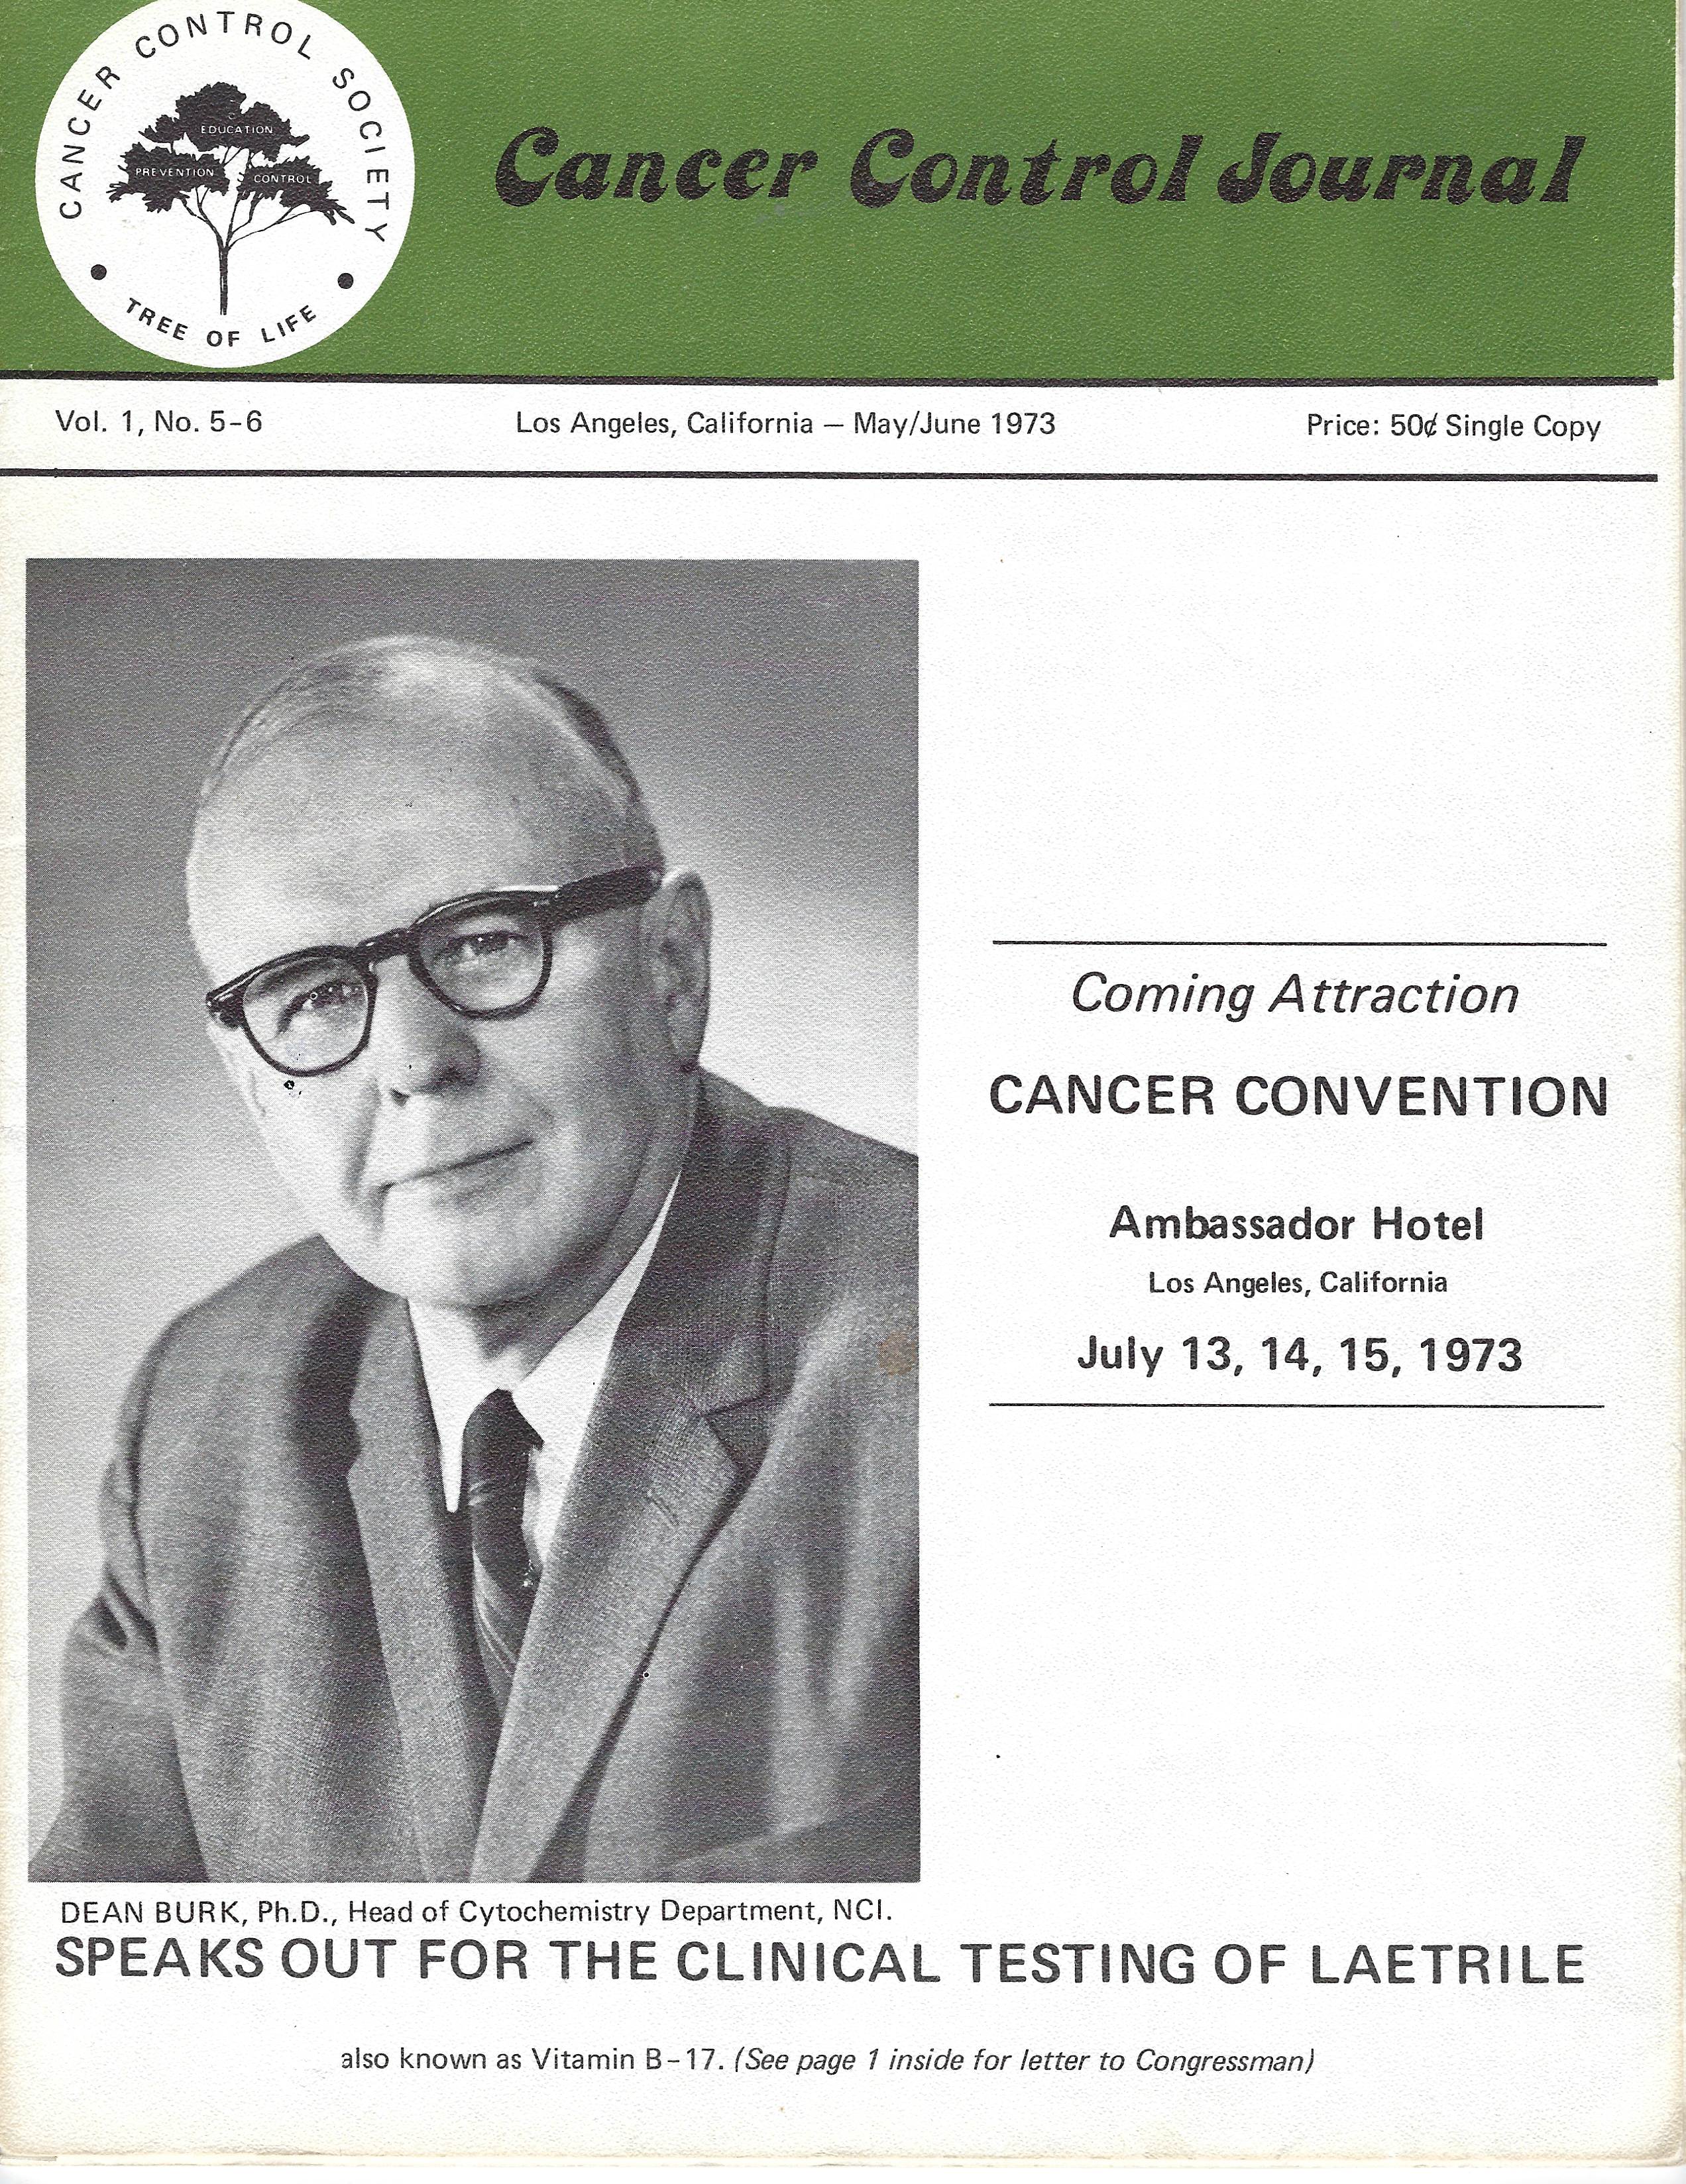 (Newsletters) 1970s Newsletters-Cancer News Journal/Cancer Control Journal (set of three, 24 pages each)